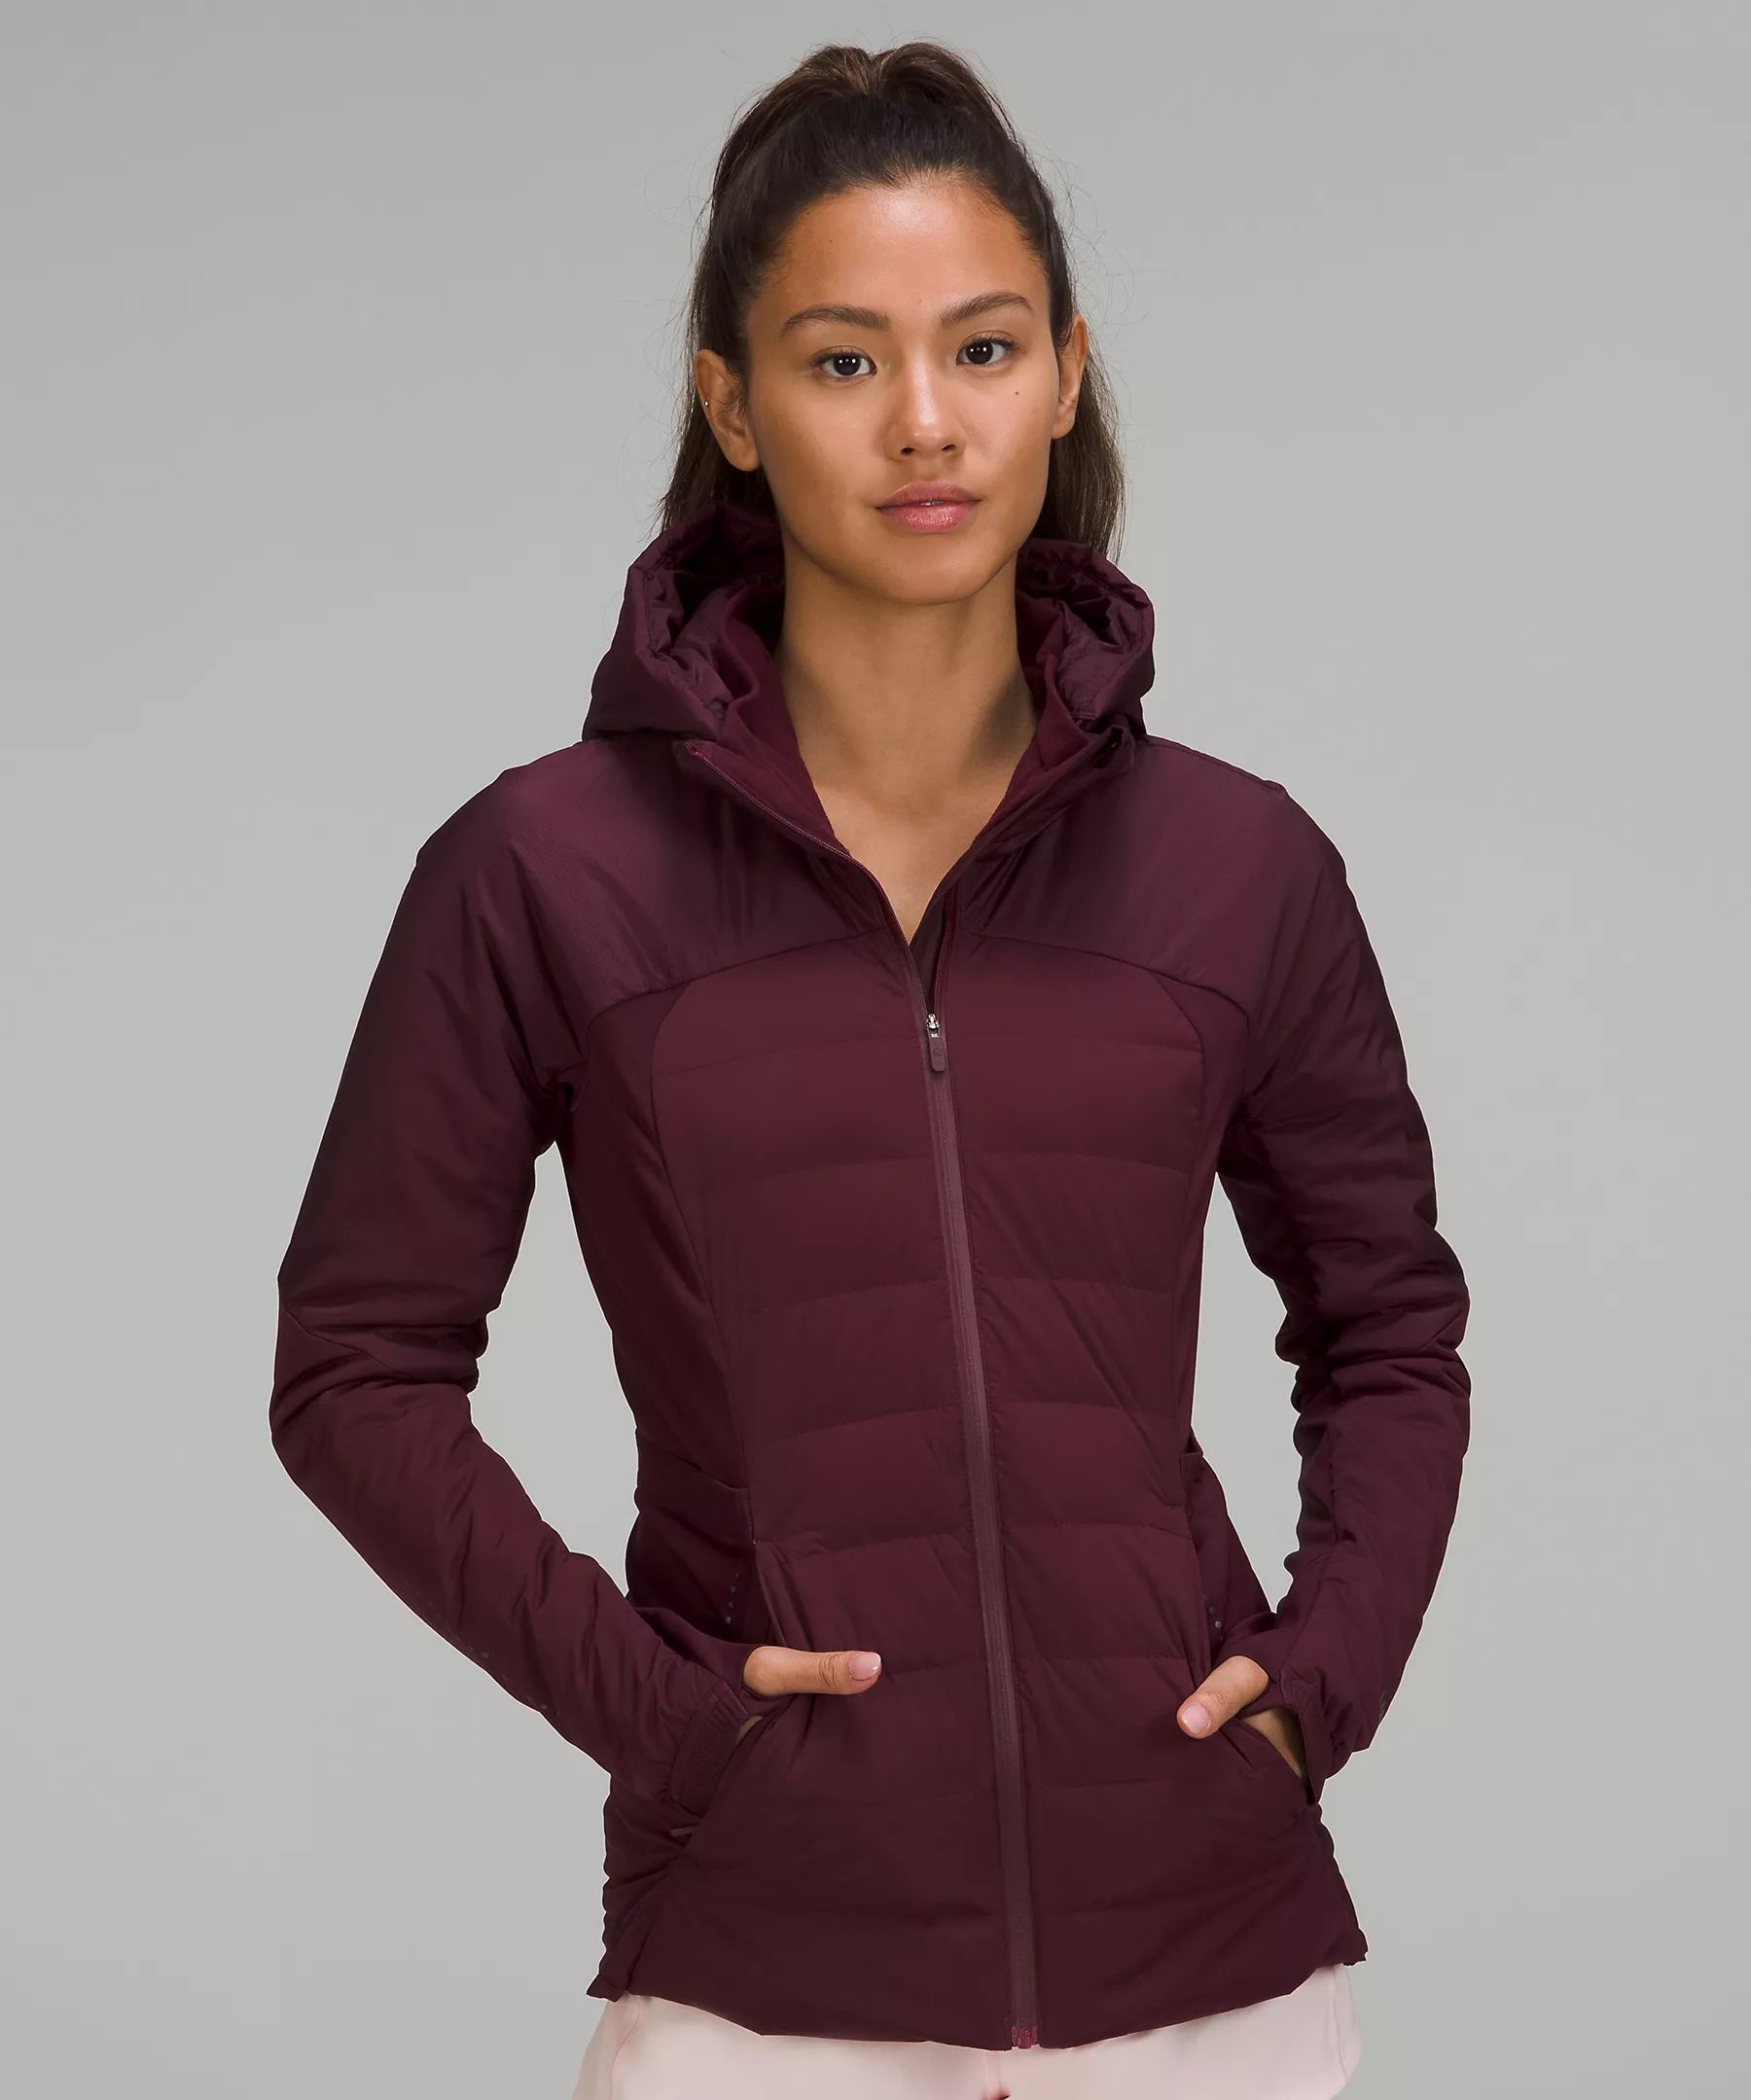 Down for It All Jacket | Lululemon (US)